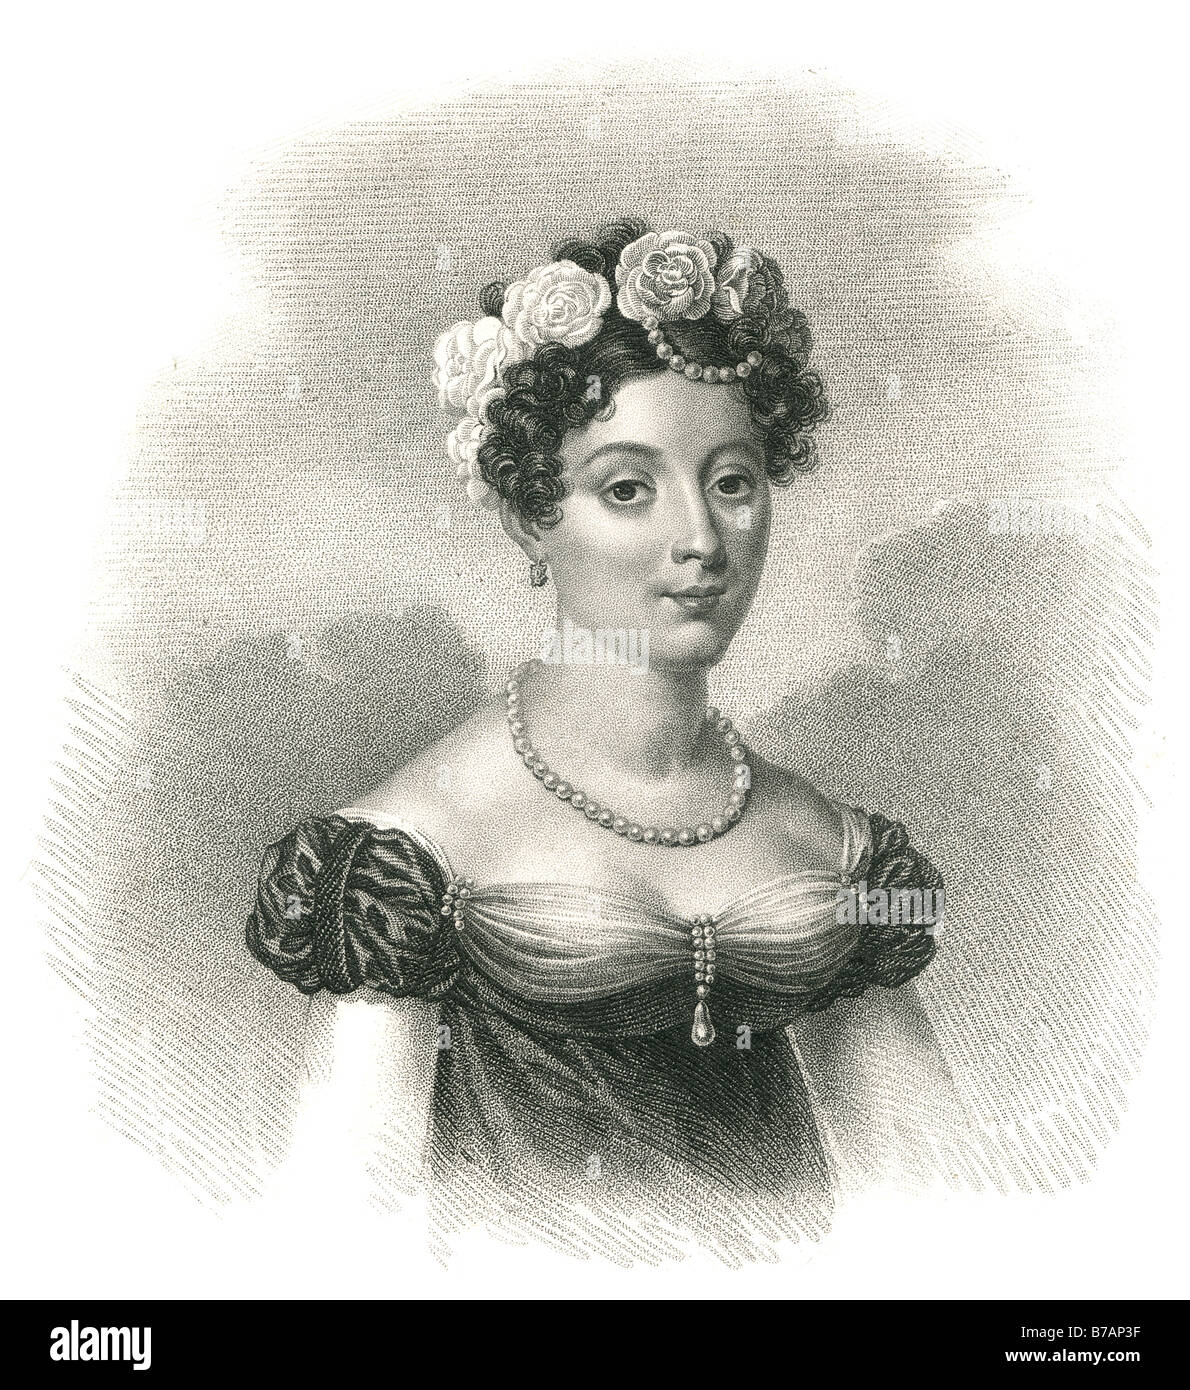 madame catalani At the time of the Bourbon Restoration, King Louis XVIII wanted to entrust the theatre to the soprano Angelica C Stock Photo